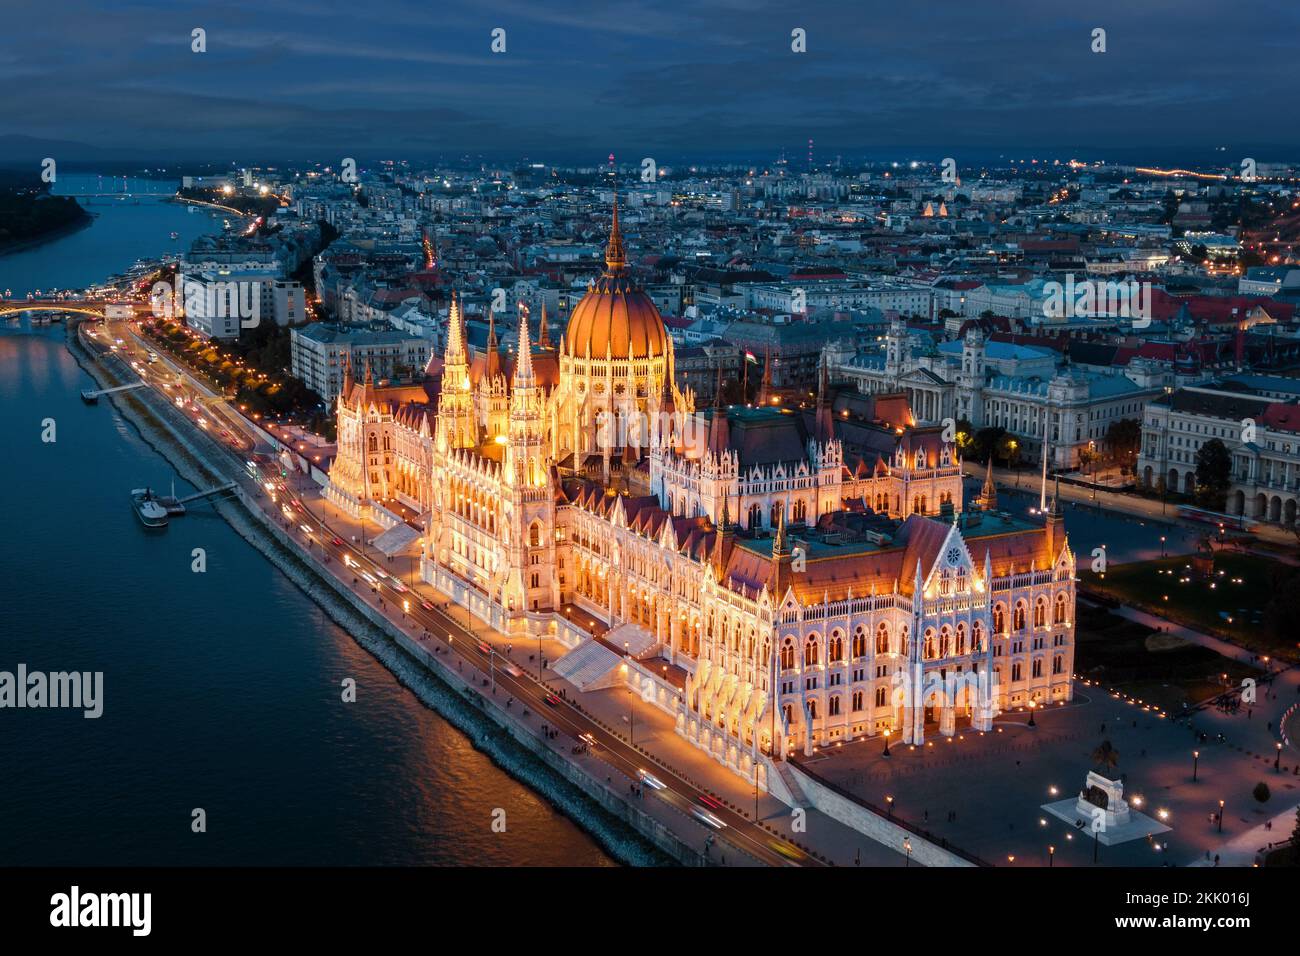 Aerial view of architectural landmark Hungarian Parliament building at dusk in Budapest, Hungary. Stock Photo